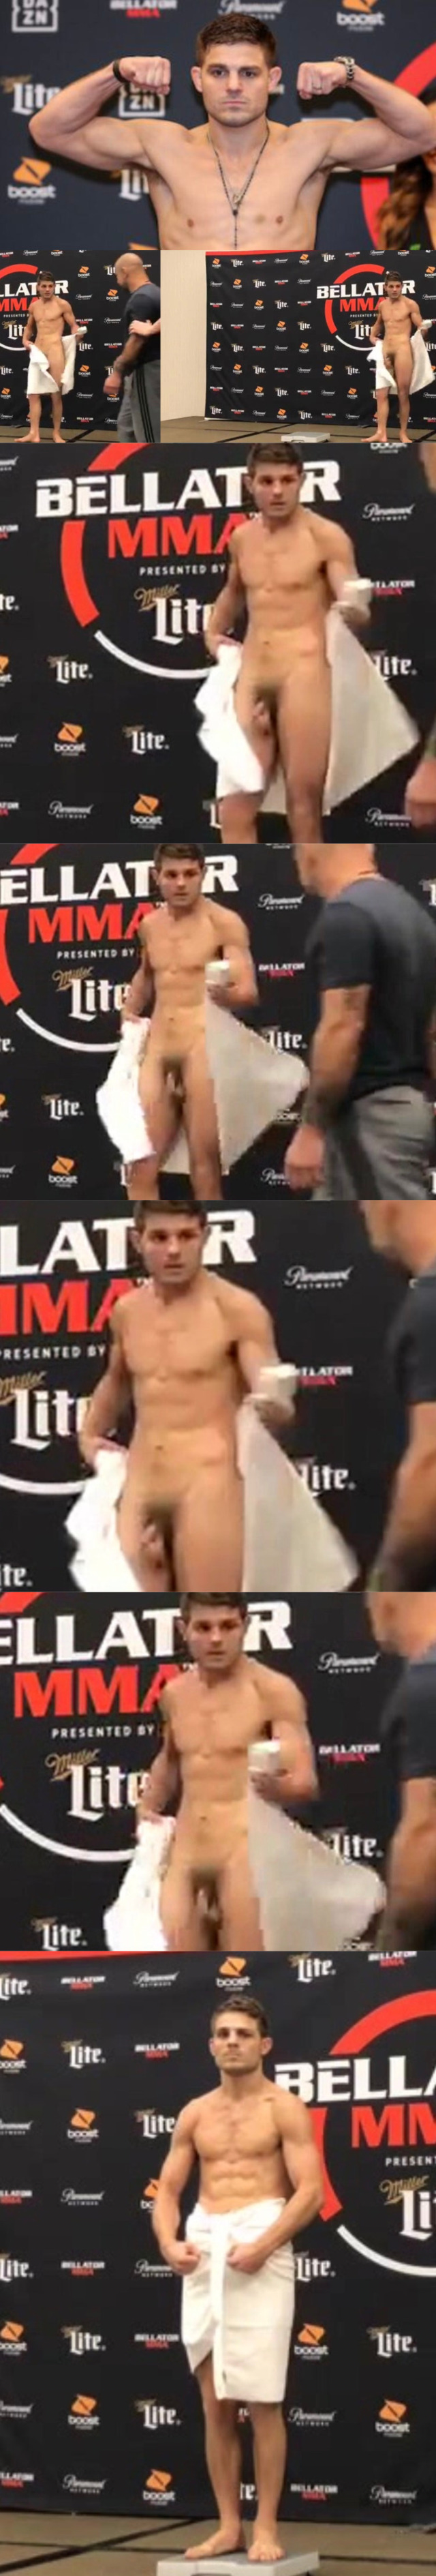 wrestler Dominic Mazzotta full frontal naked during weigh in